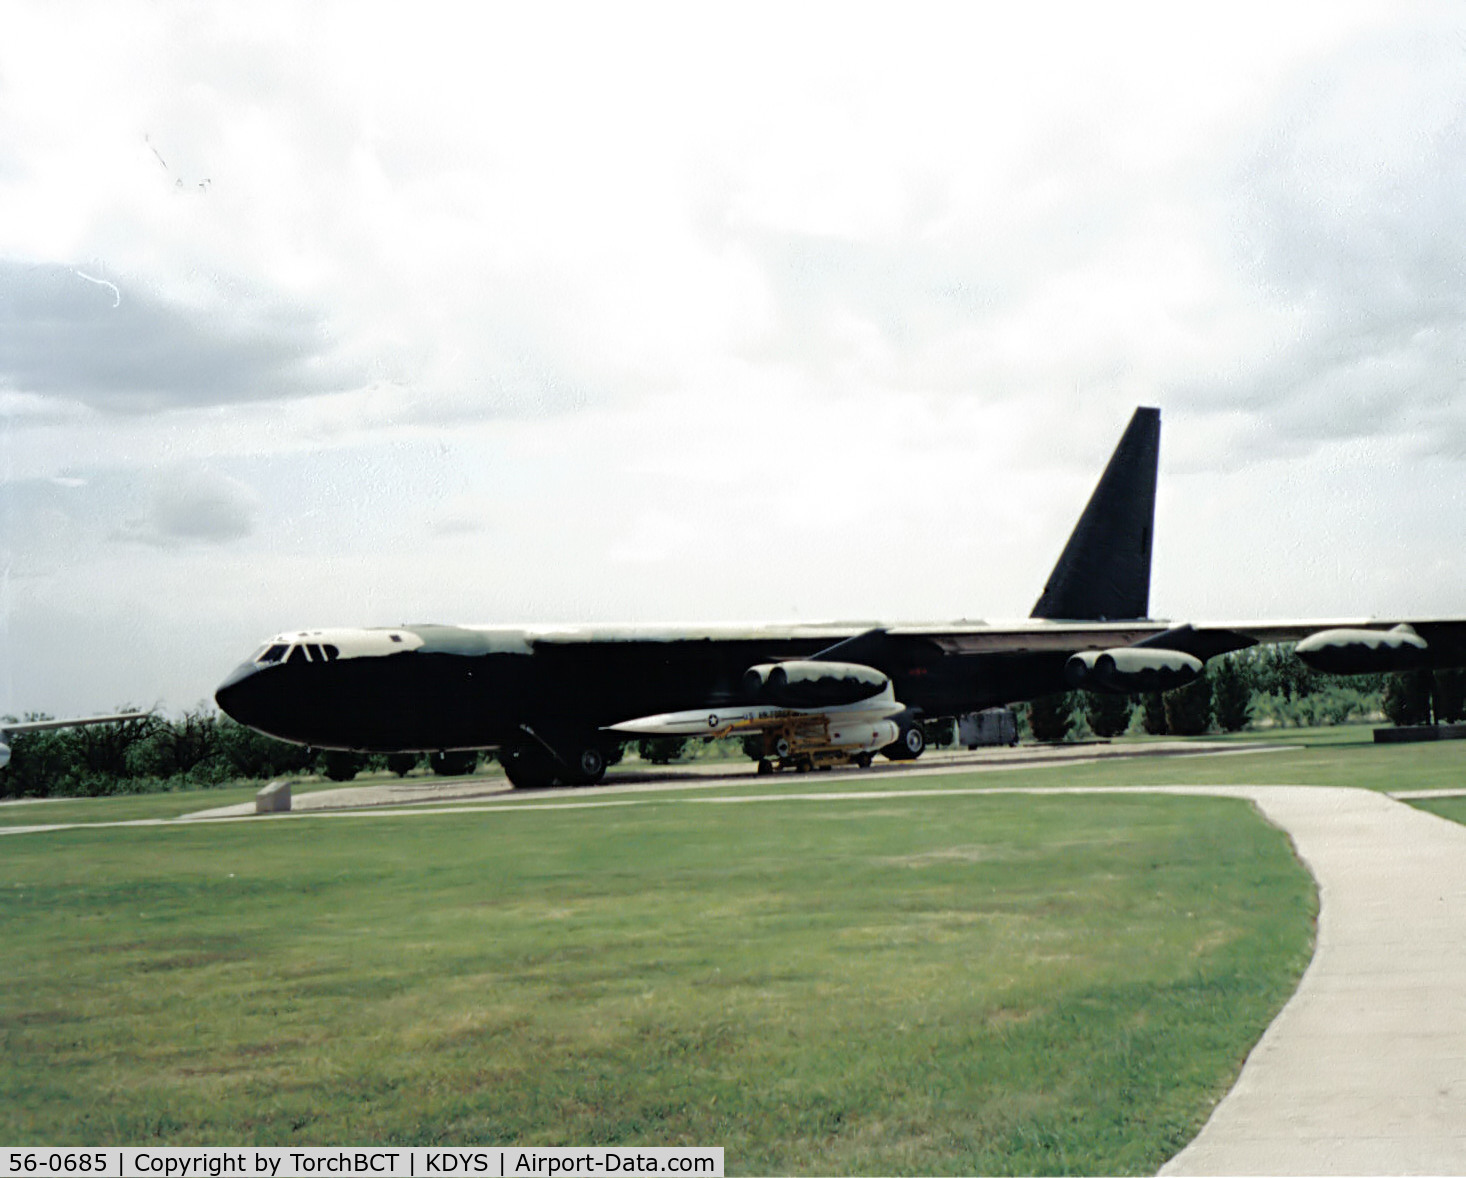 56-0685, 1956 Boeing B-52D Stratofortress C/N 464056, Stratofortress @ Dyess AFB